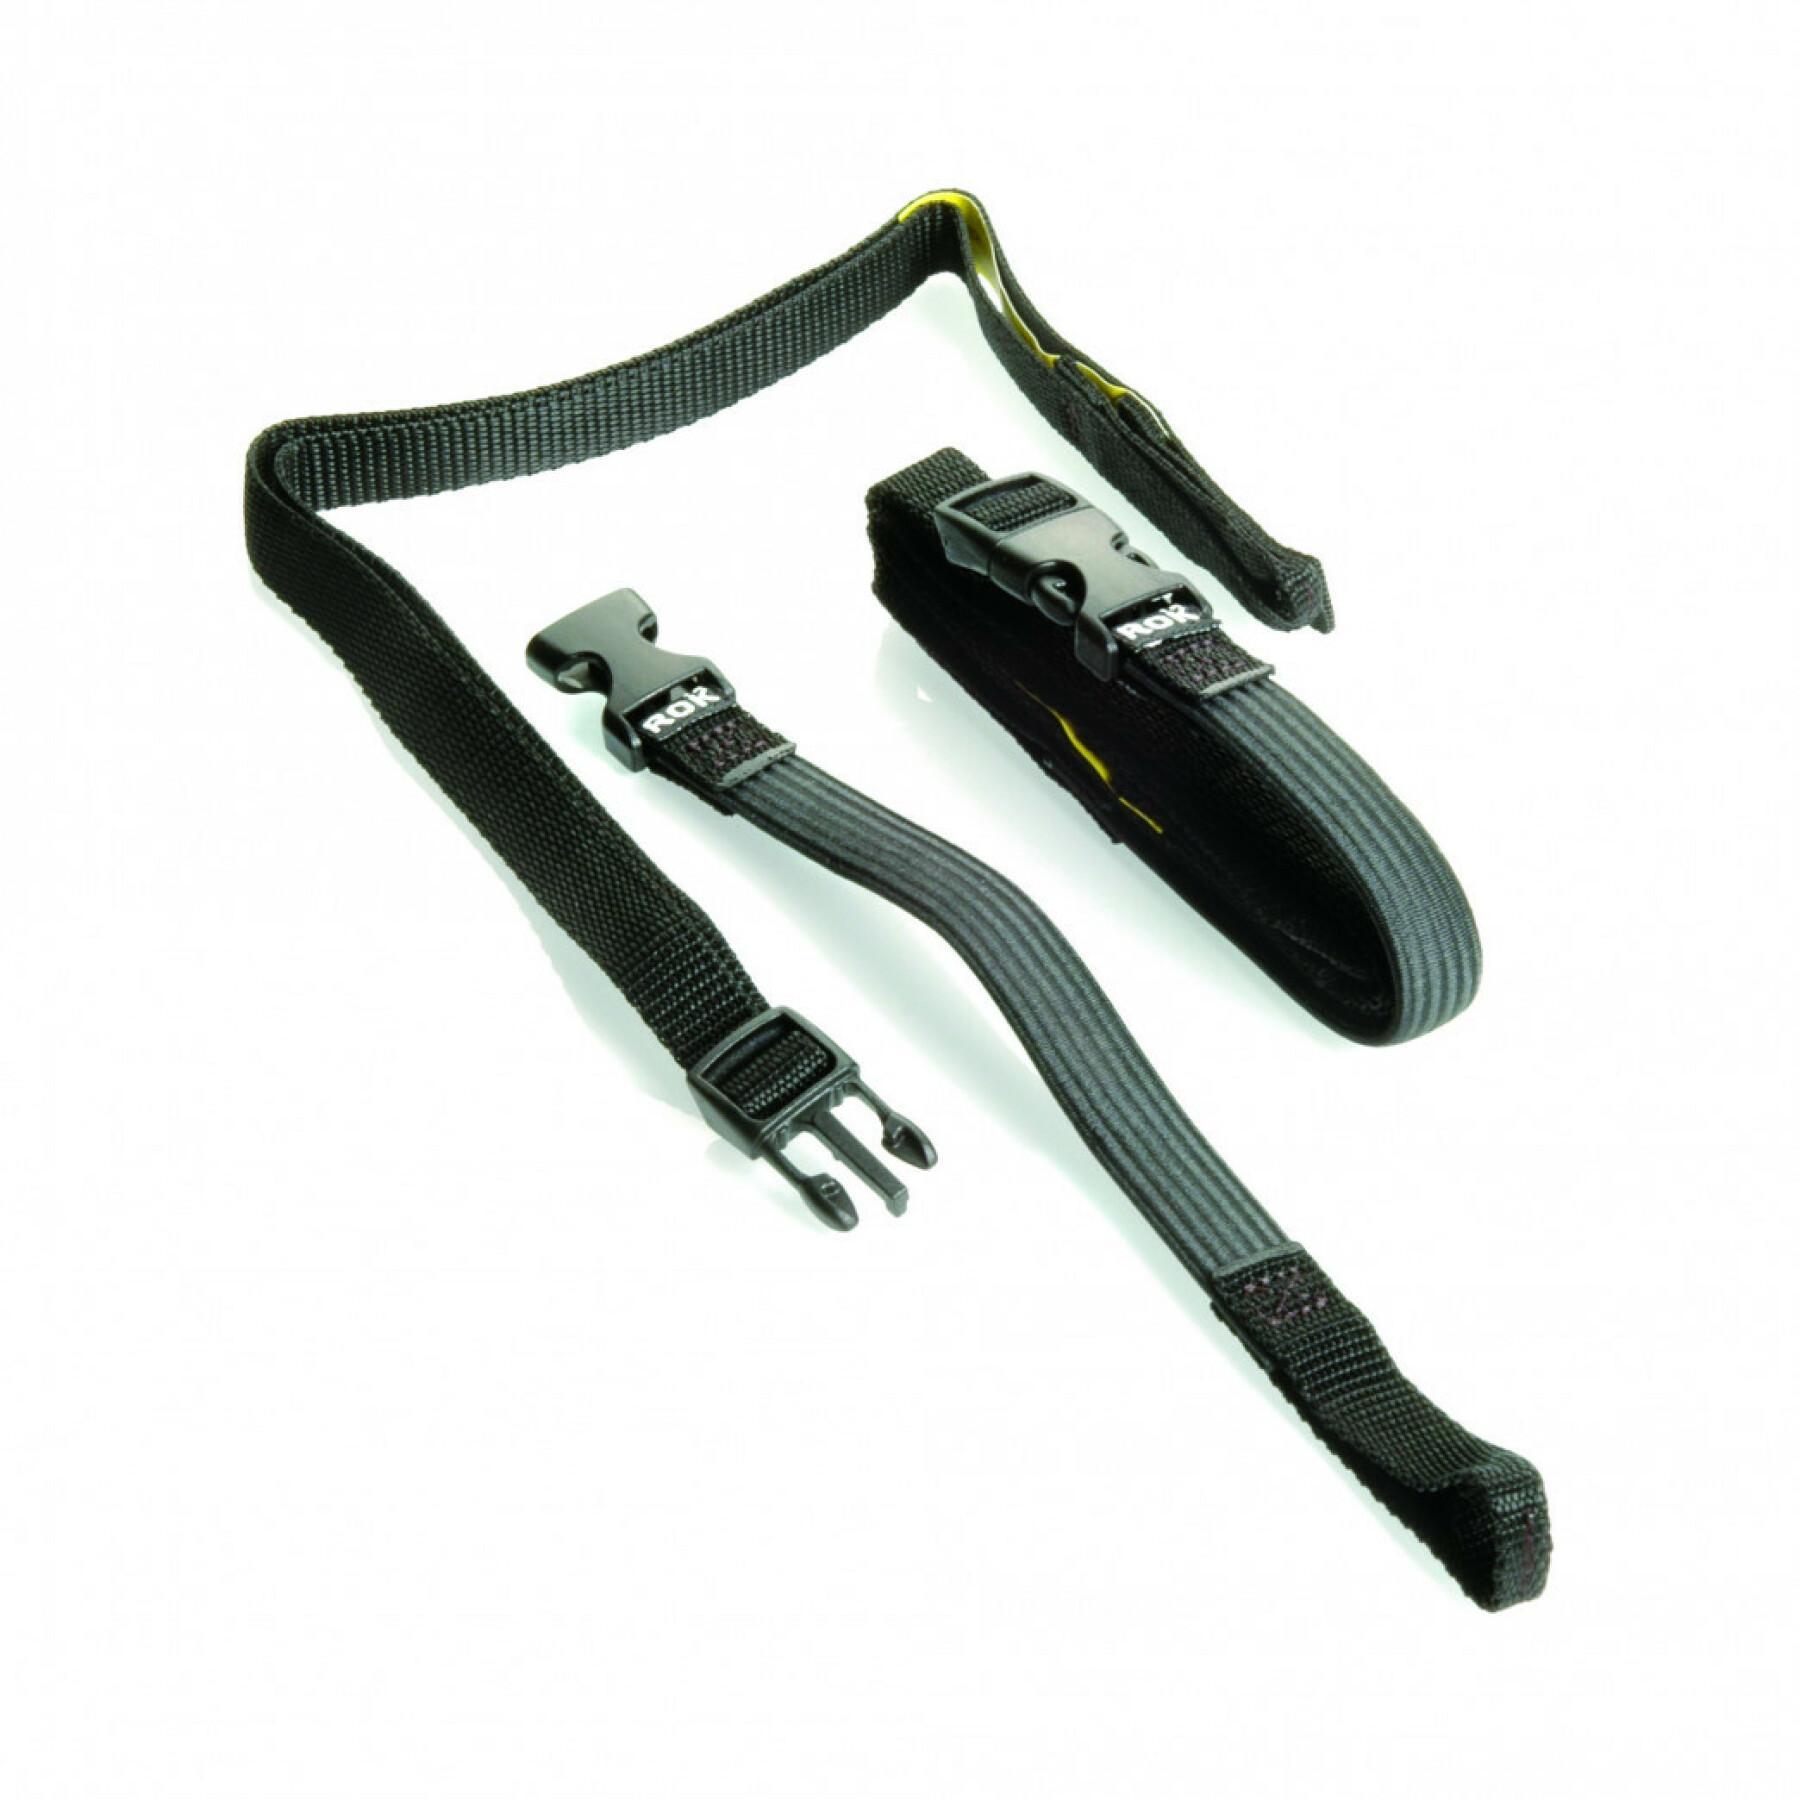 Motorcycle tensioning strap Booster Cargo Hd